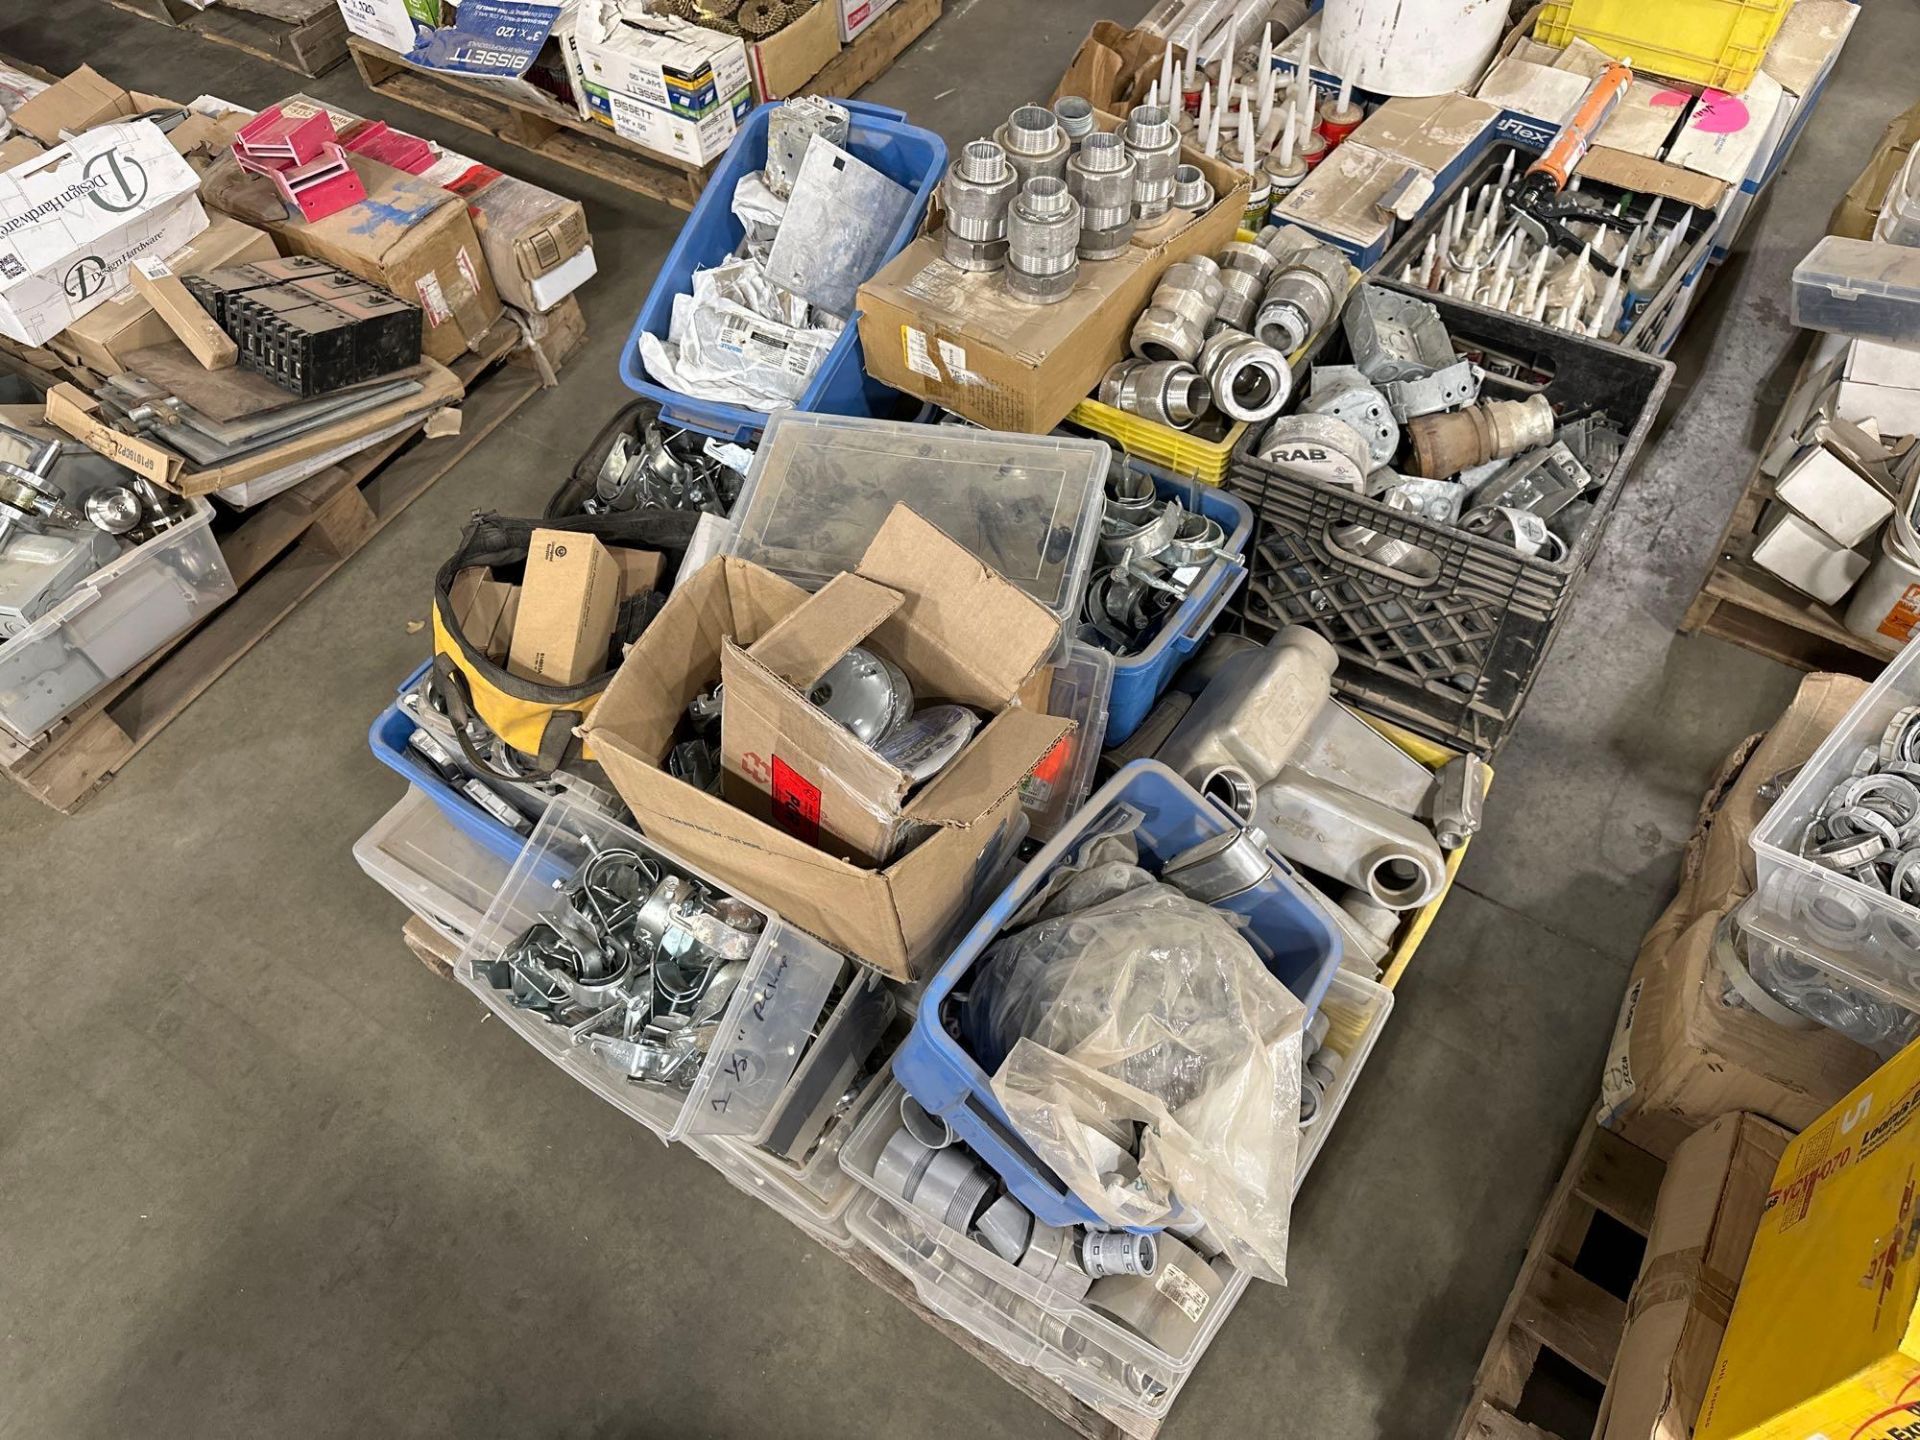 Pallet of Asst. Connectors, Hangers, Electrical Boxes, Breakers, Straps, etc. - Image 2 of 3